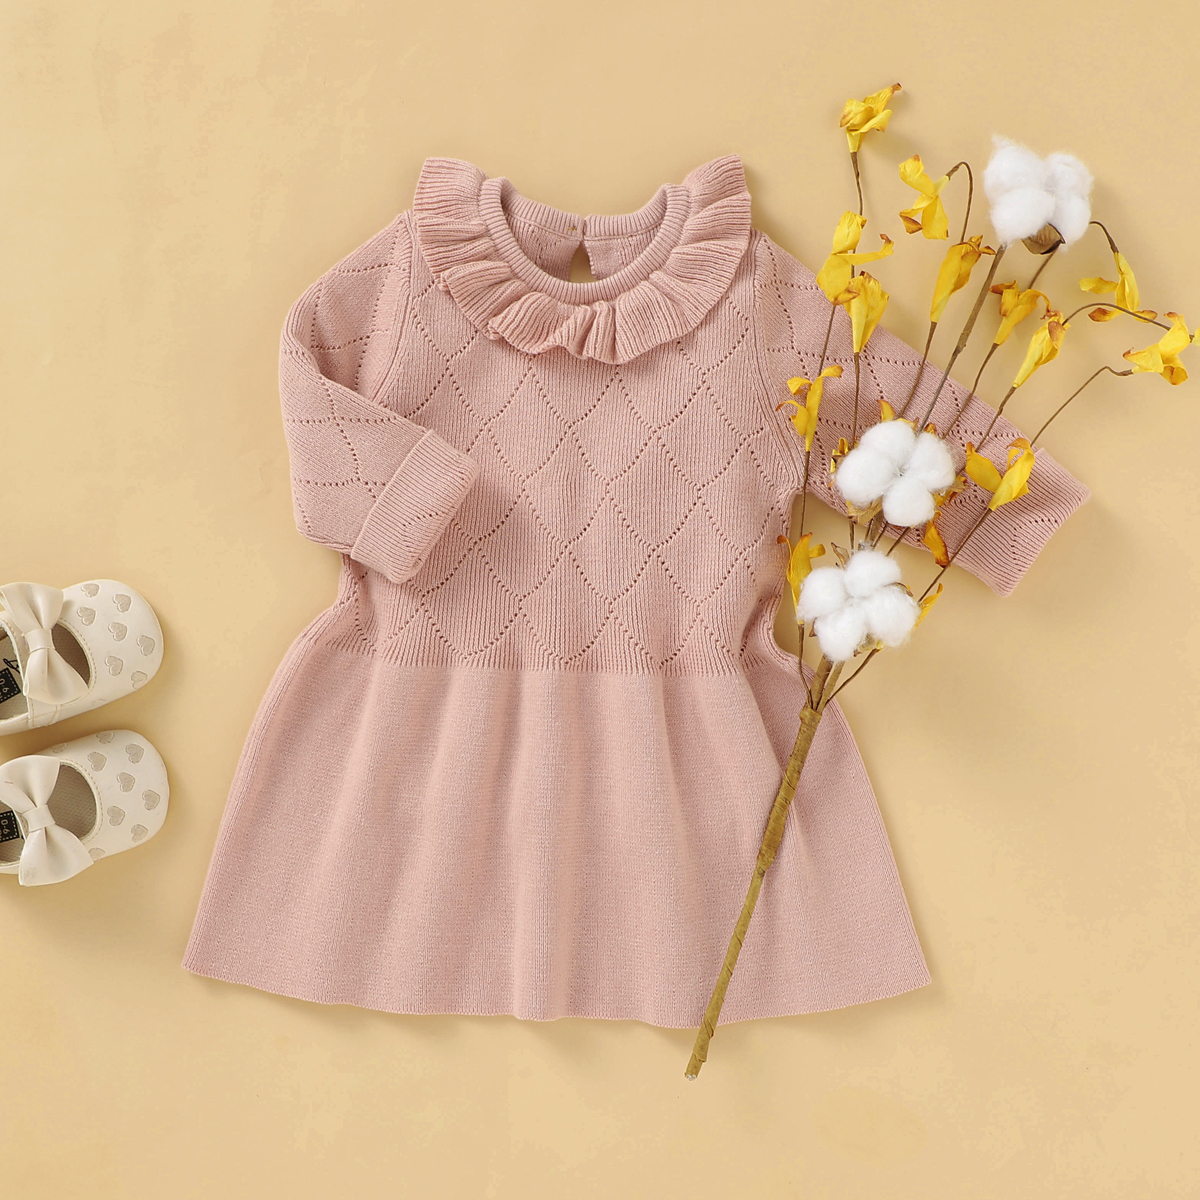 Infant Newborn Baby Girls Sweaters Dress Hollow Out Knitted Long Sleeve Ruffled Gown Solid Autumn Winter Dresses